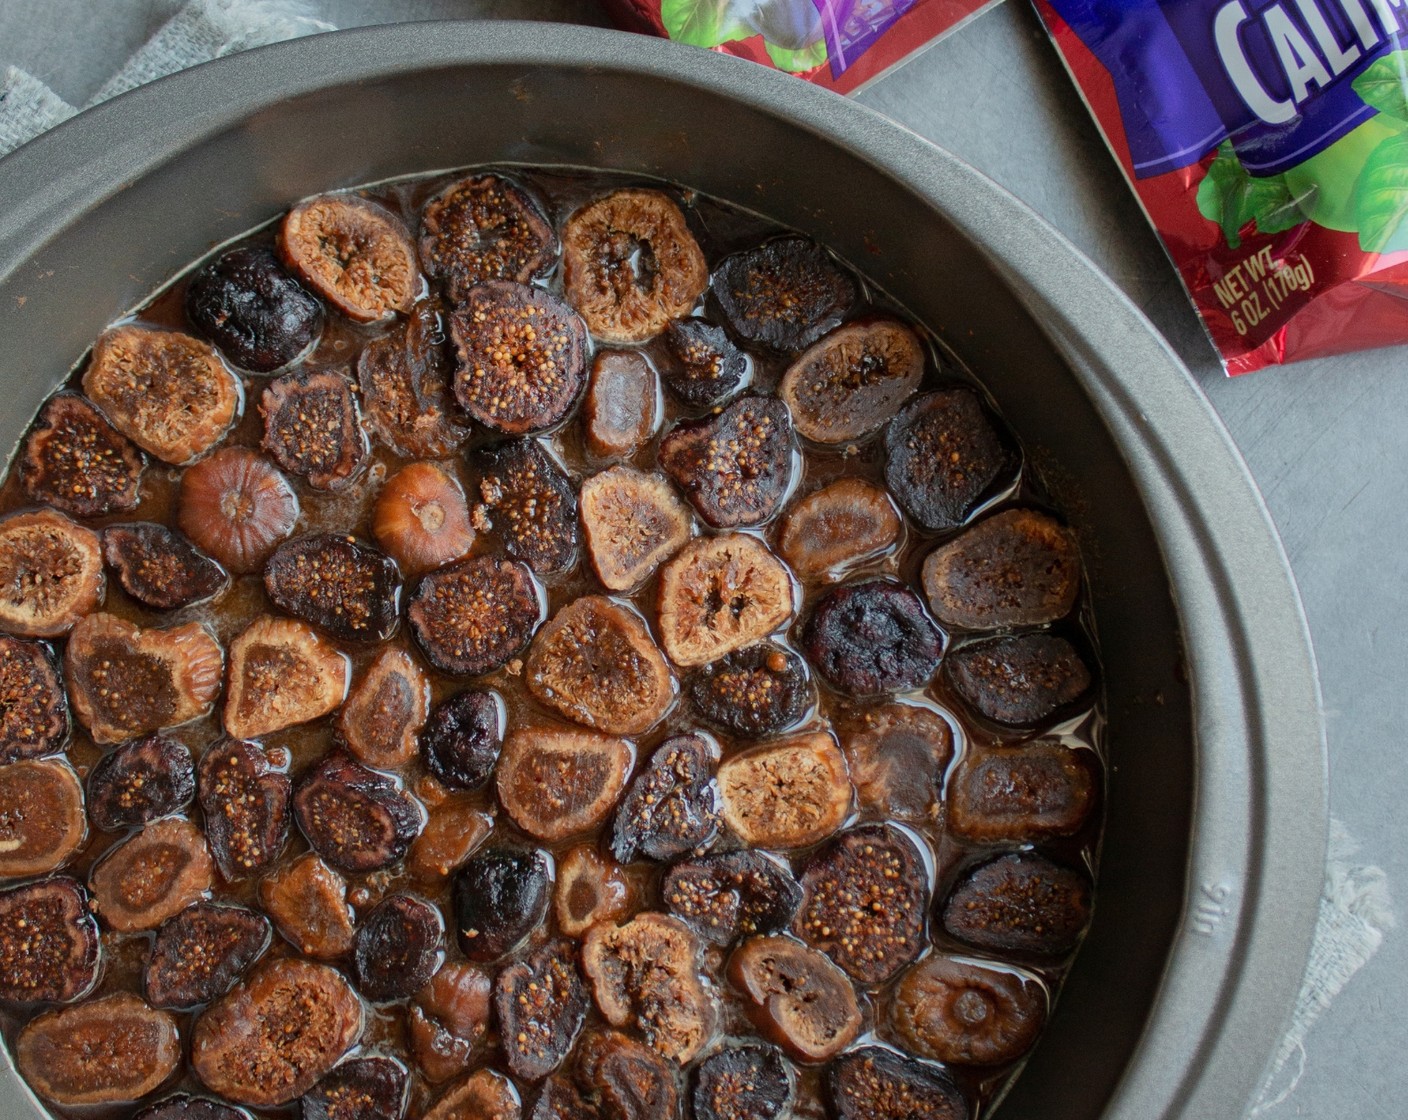 step 2 In a small bowl, mix Water (2 Tbsp), Jaggery Powder (3 Tbsp), and Brown Sugar (1/4 cup) until you have a slurry. Pour the mixture into the bottom of the cake pan and spread evenly. Top with Dried Figs (12).